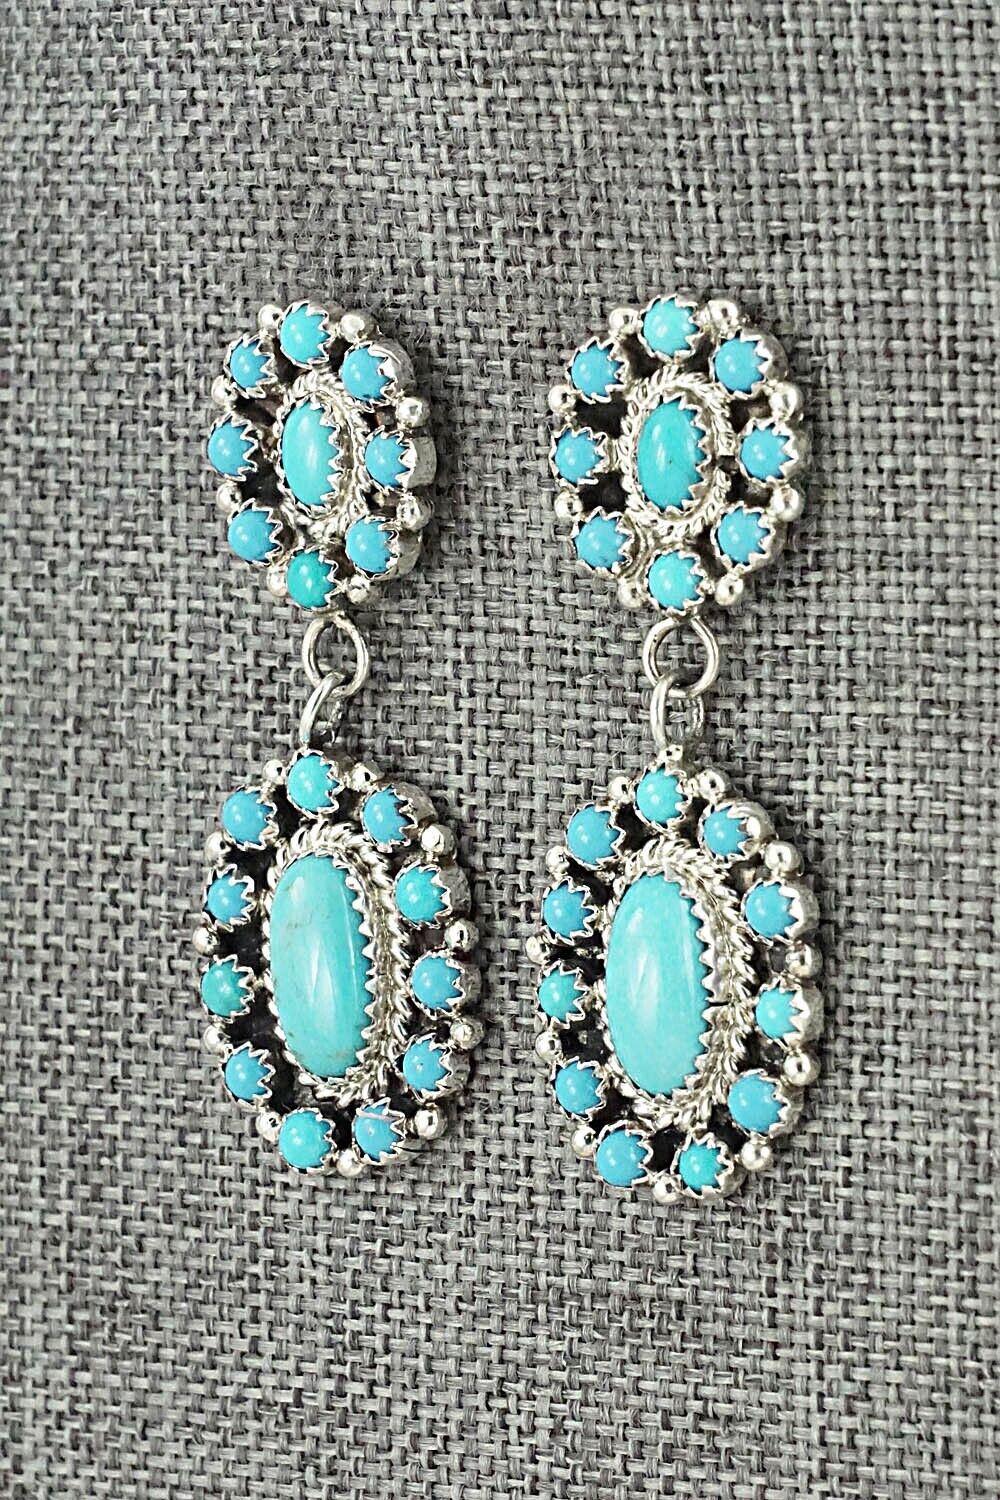 Turquoise & Sterling Silver Earrings - Nathaniel Curley